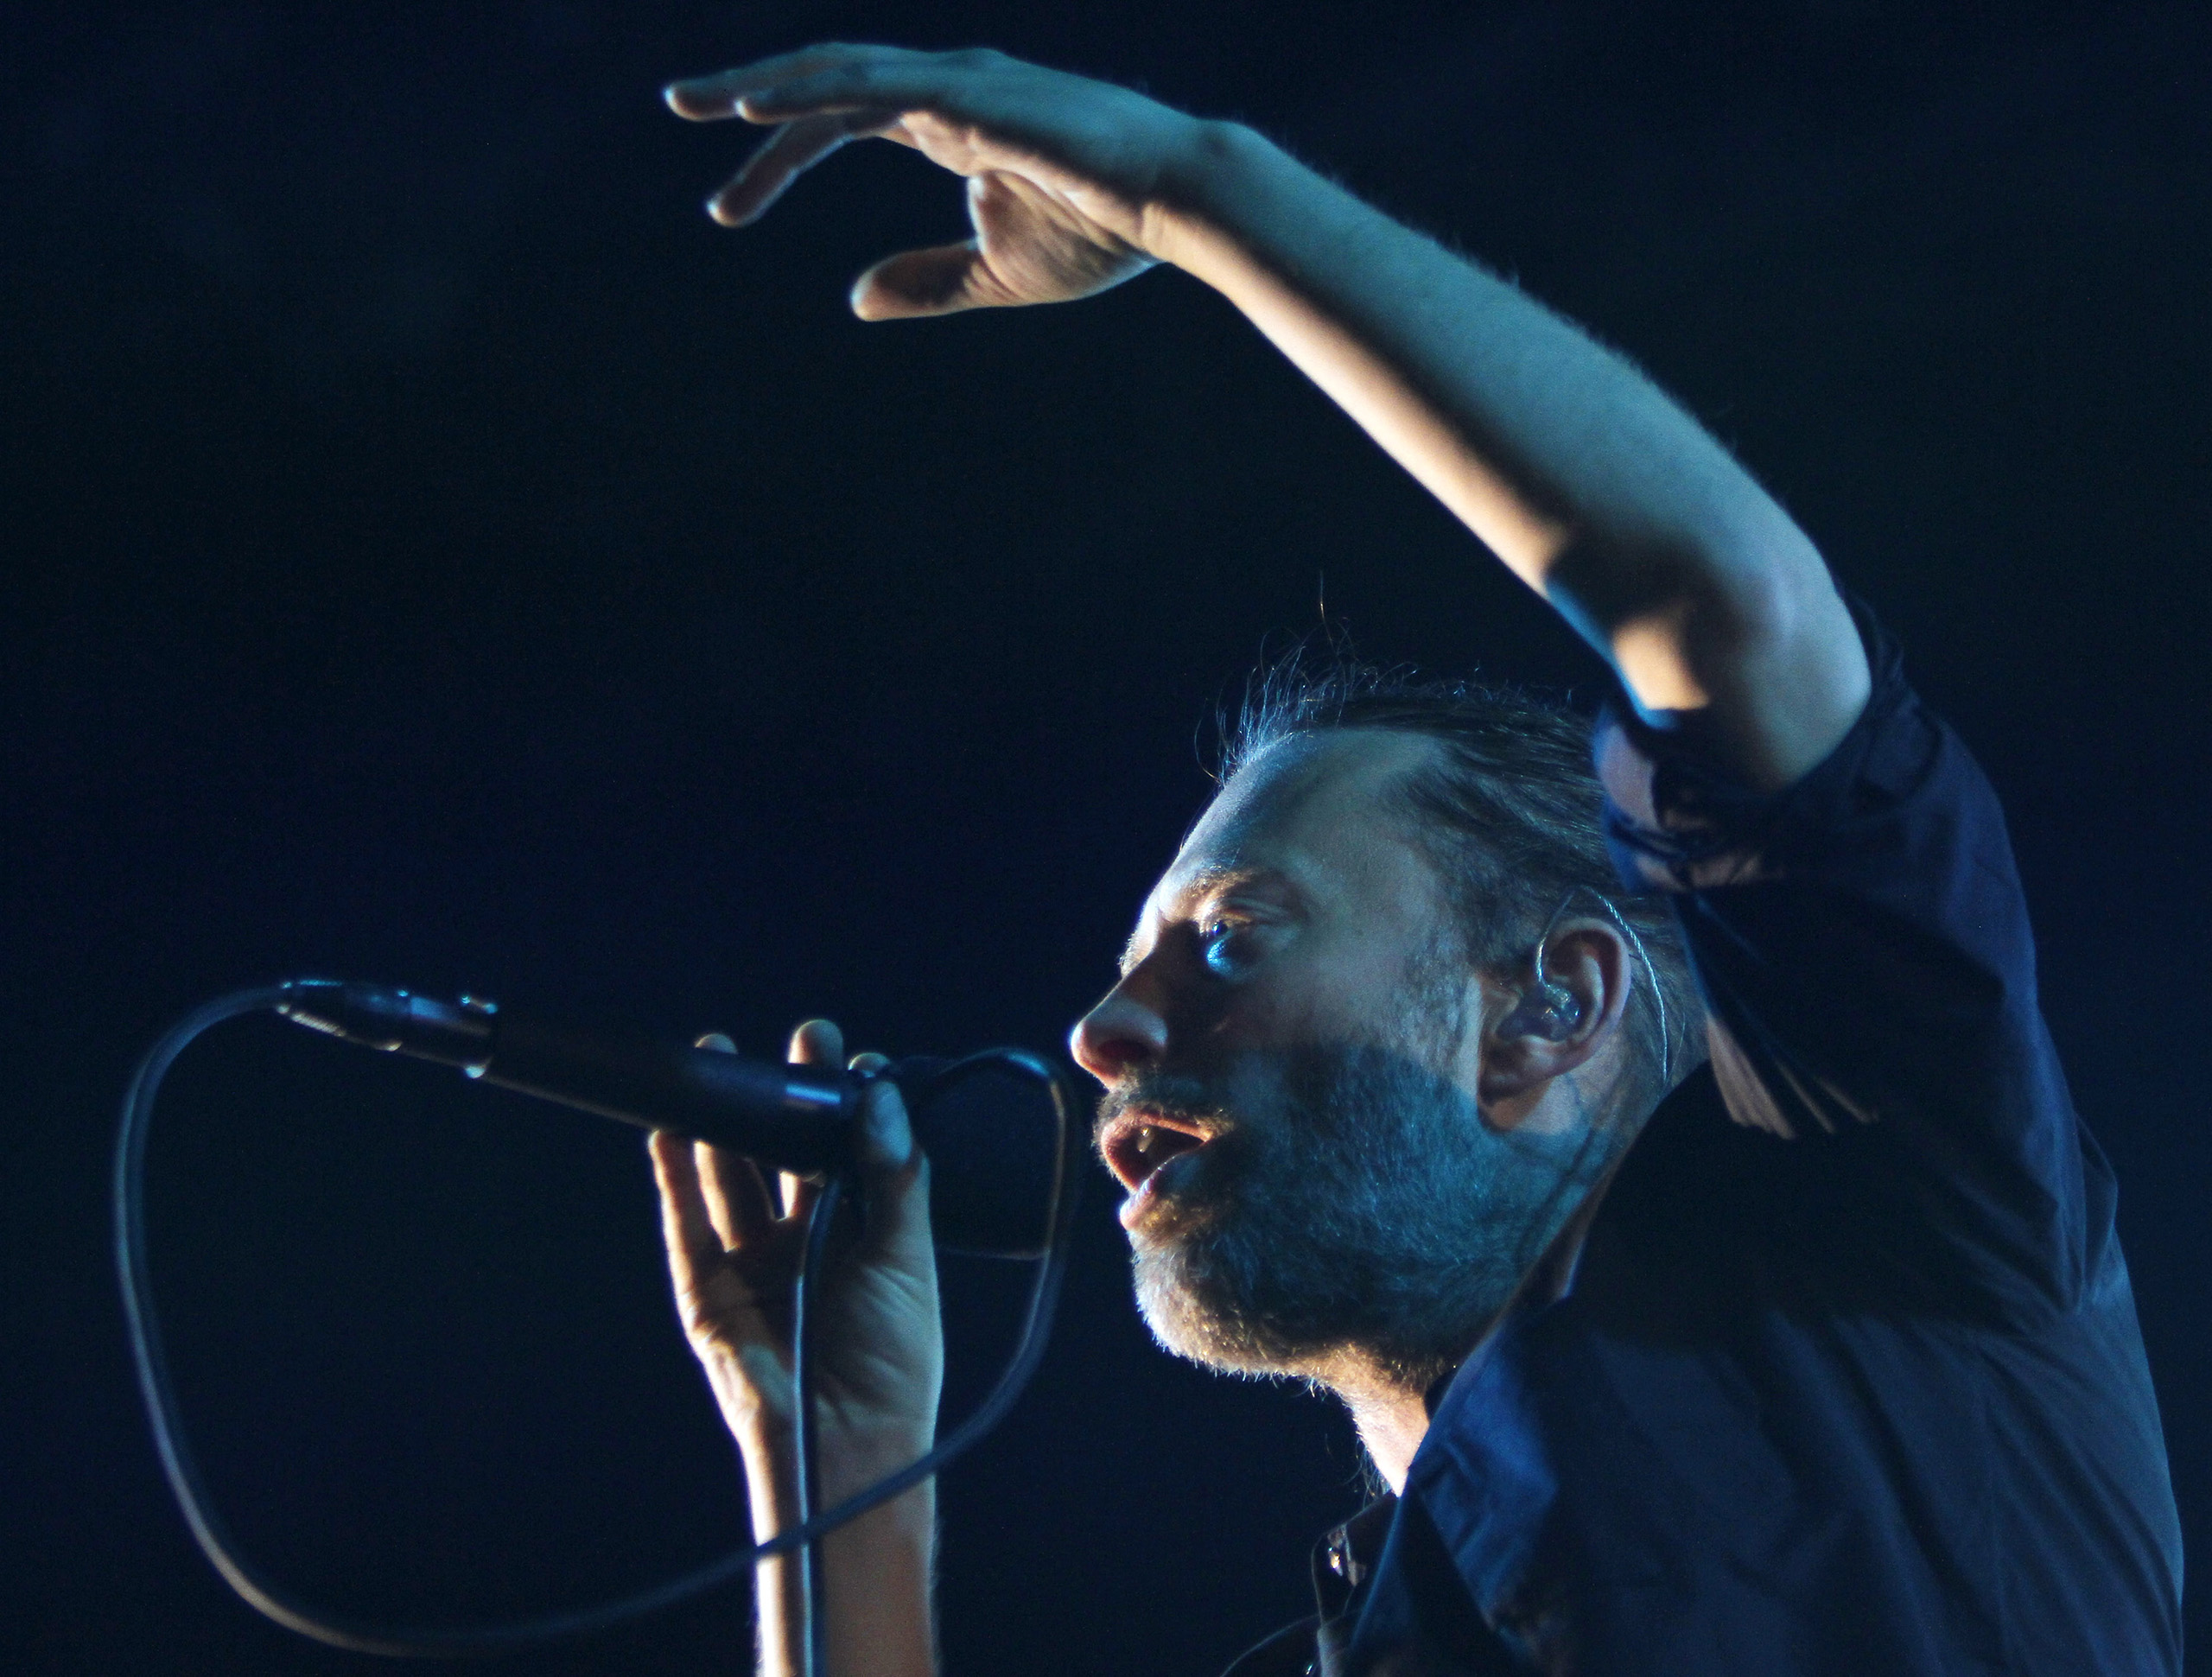 Thom Yorke of British band Radiohead performs at the Optimus Alive Festival